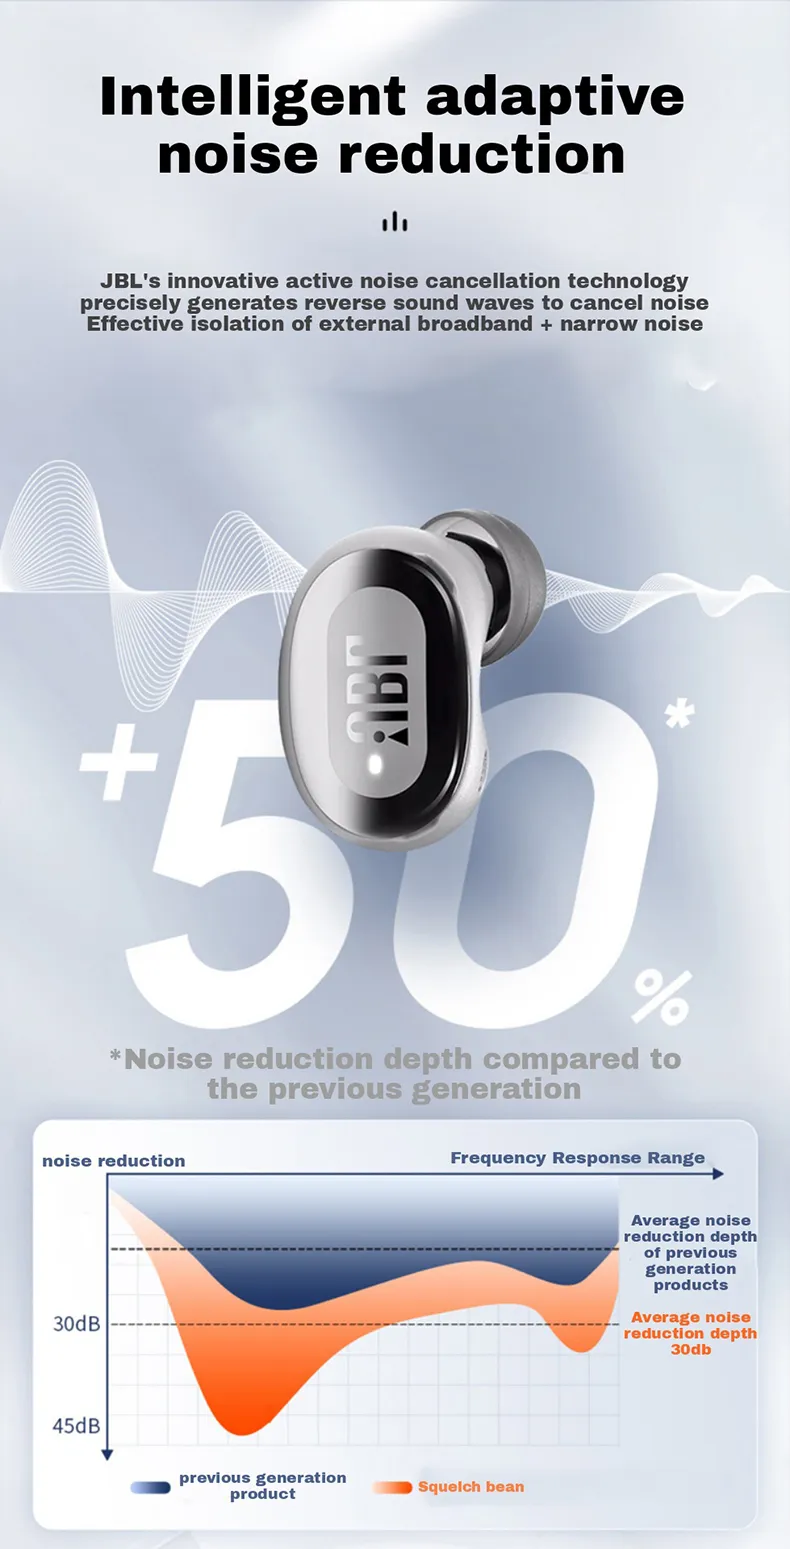 JBL Live Free 2 TWS Noise Cancelling Earbuds